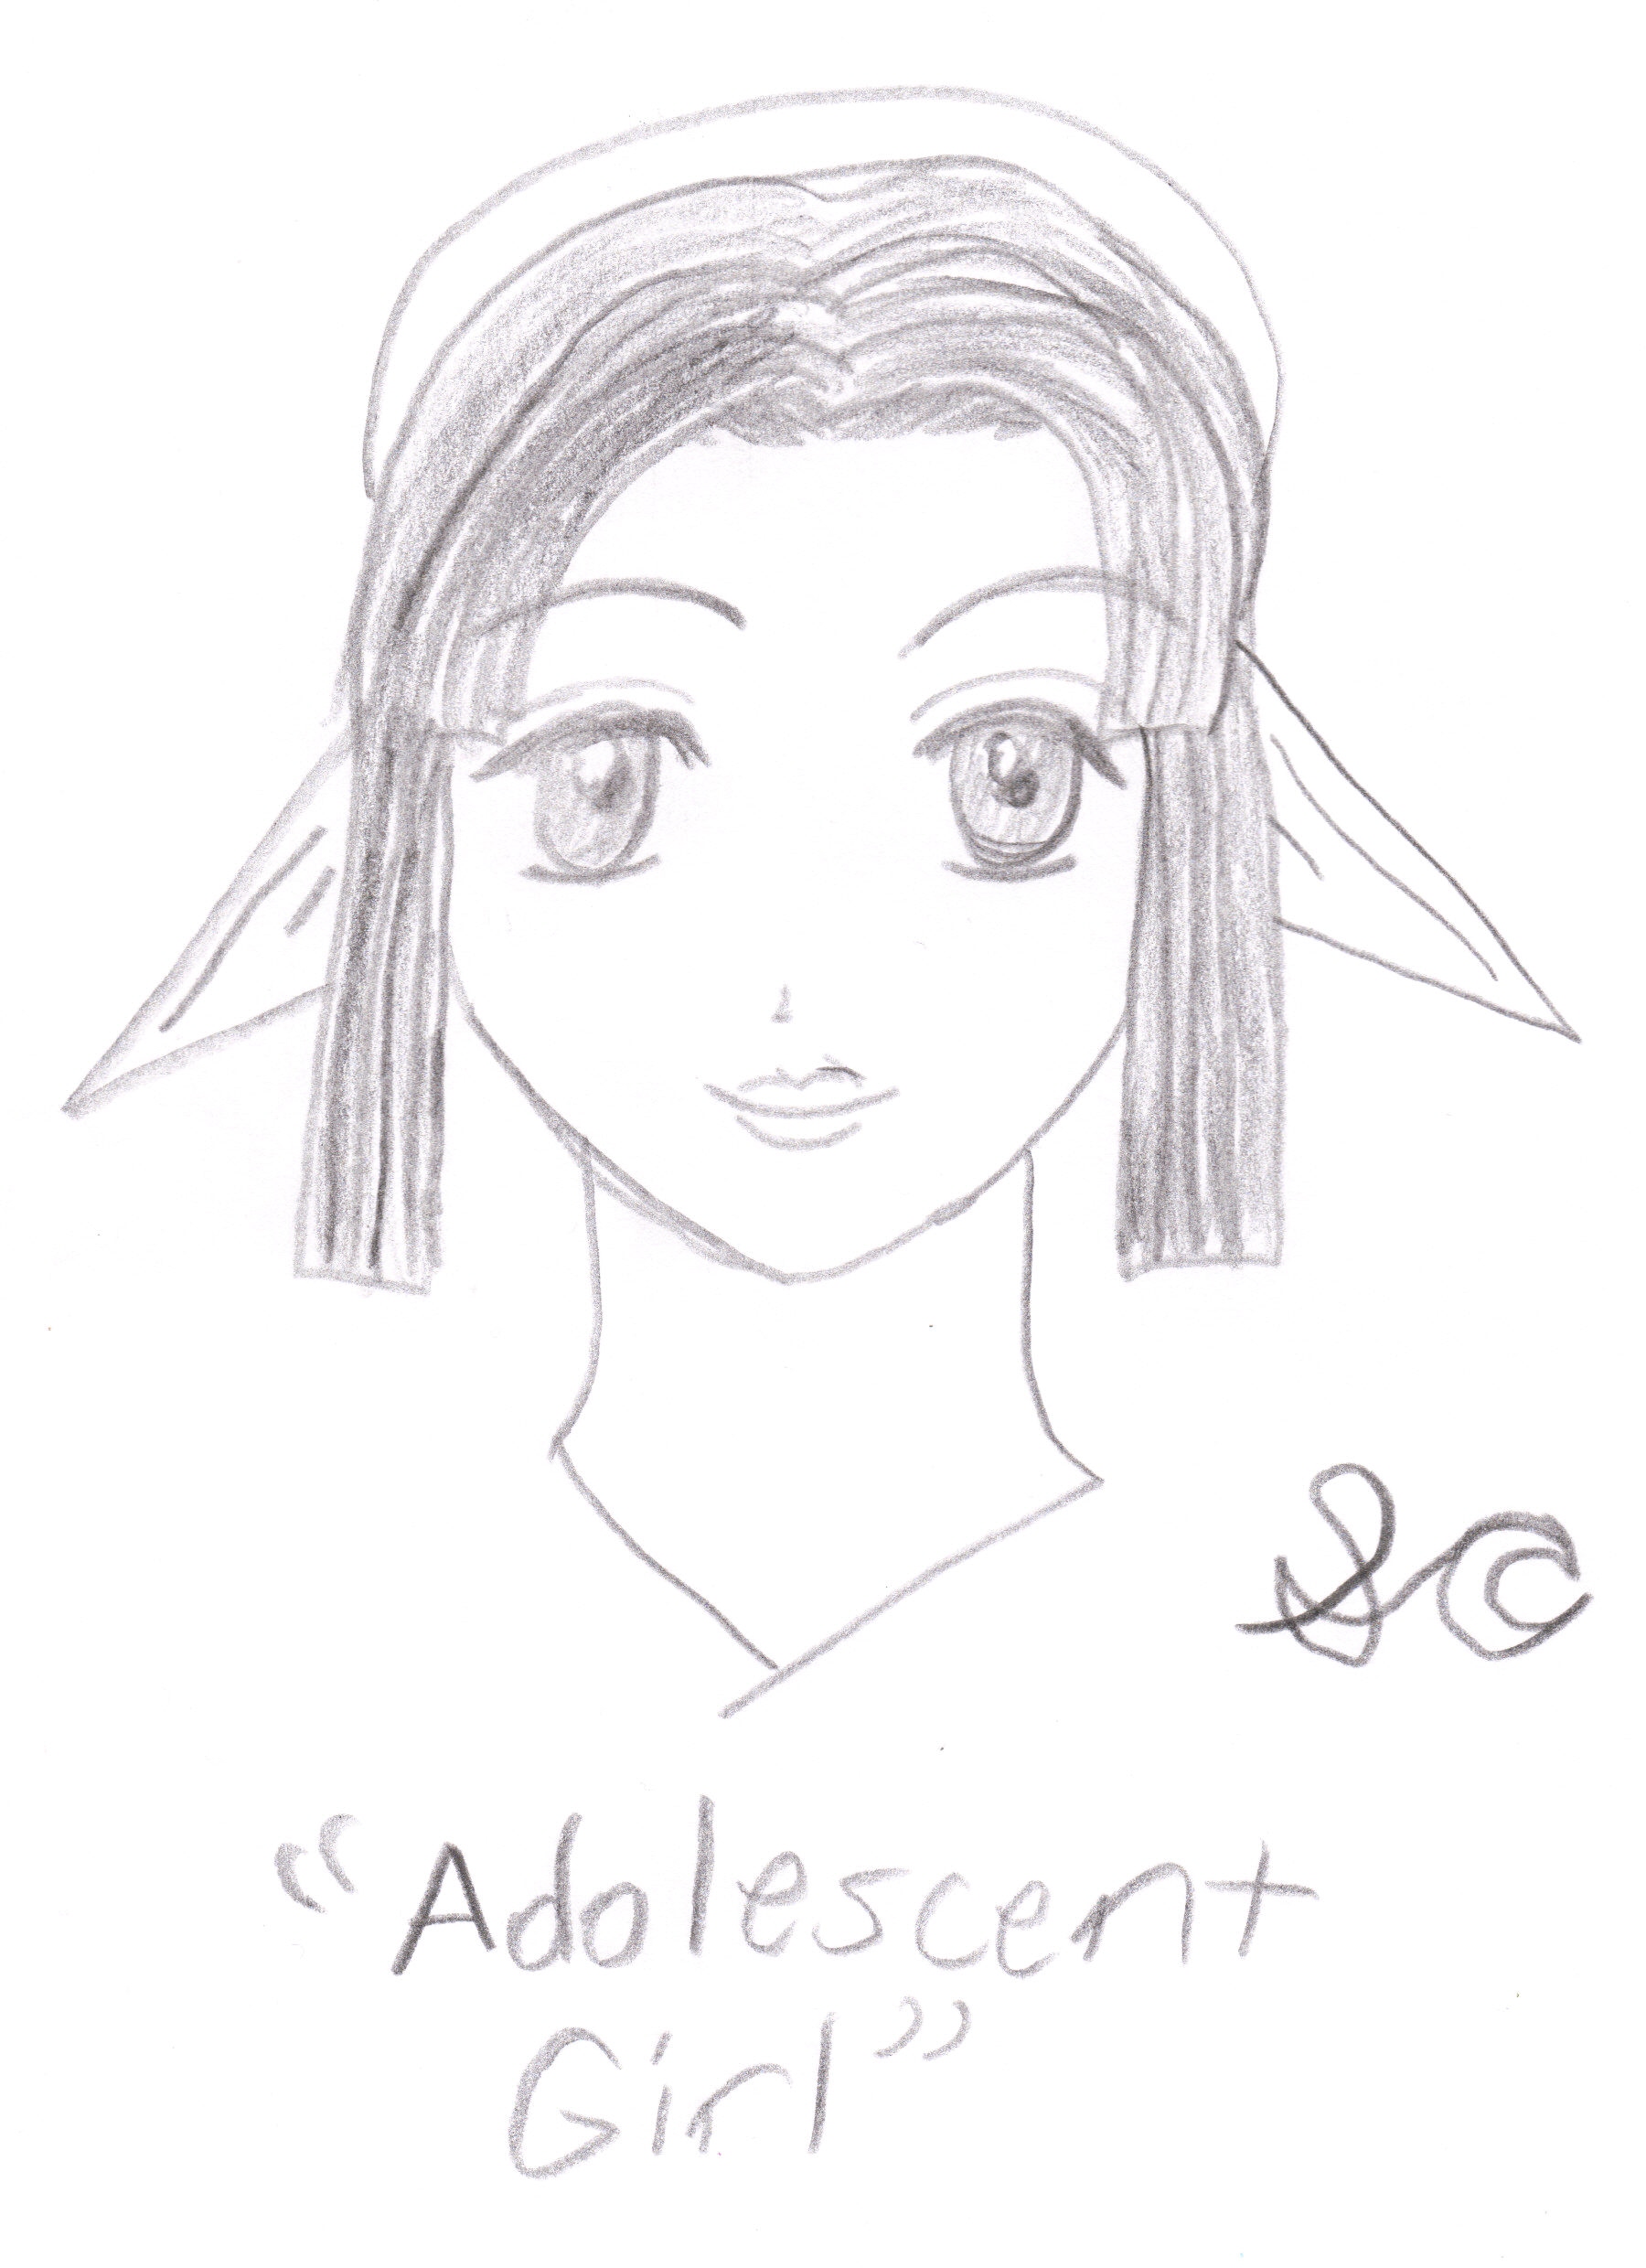 Adolescent Girl by Daughter_of_Fire